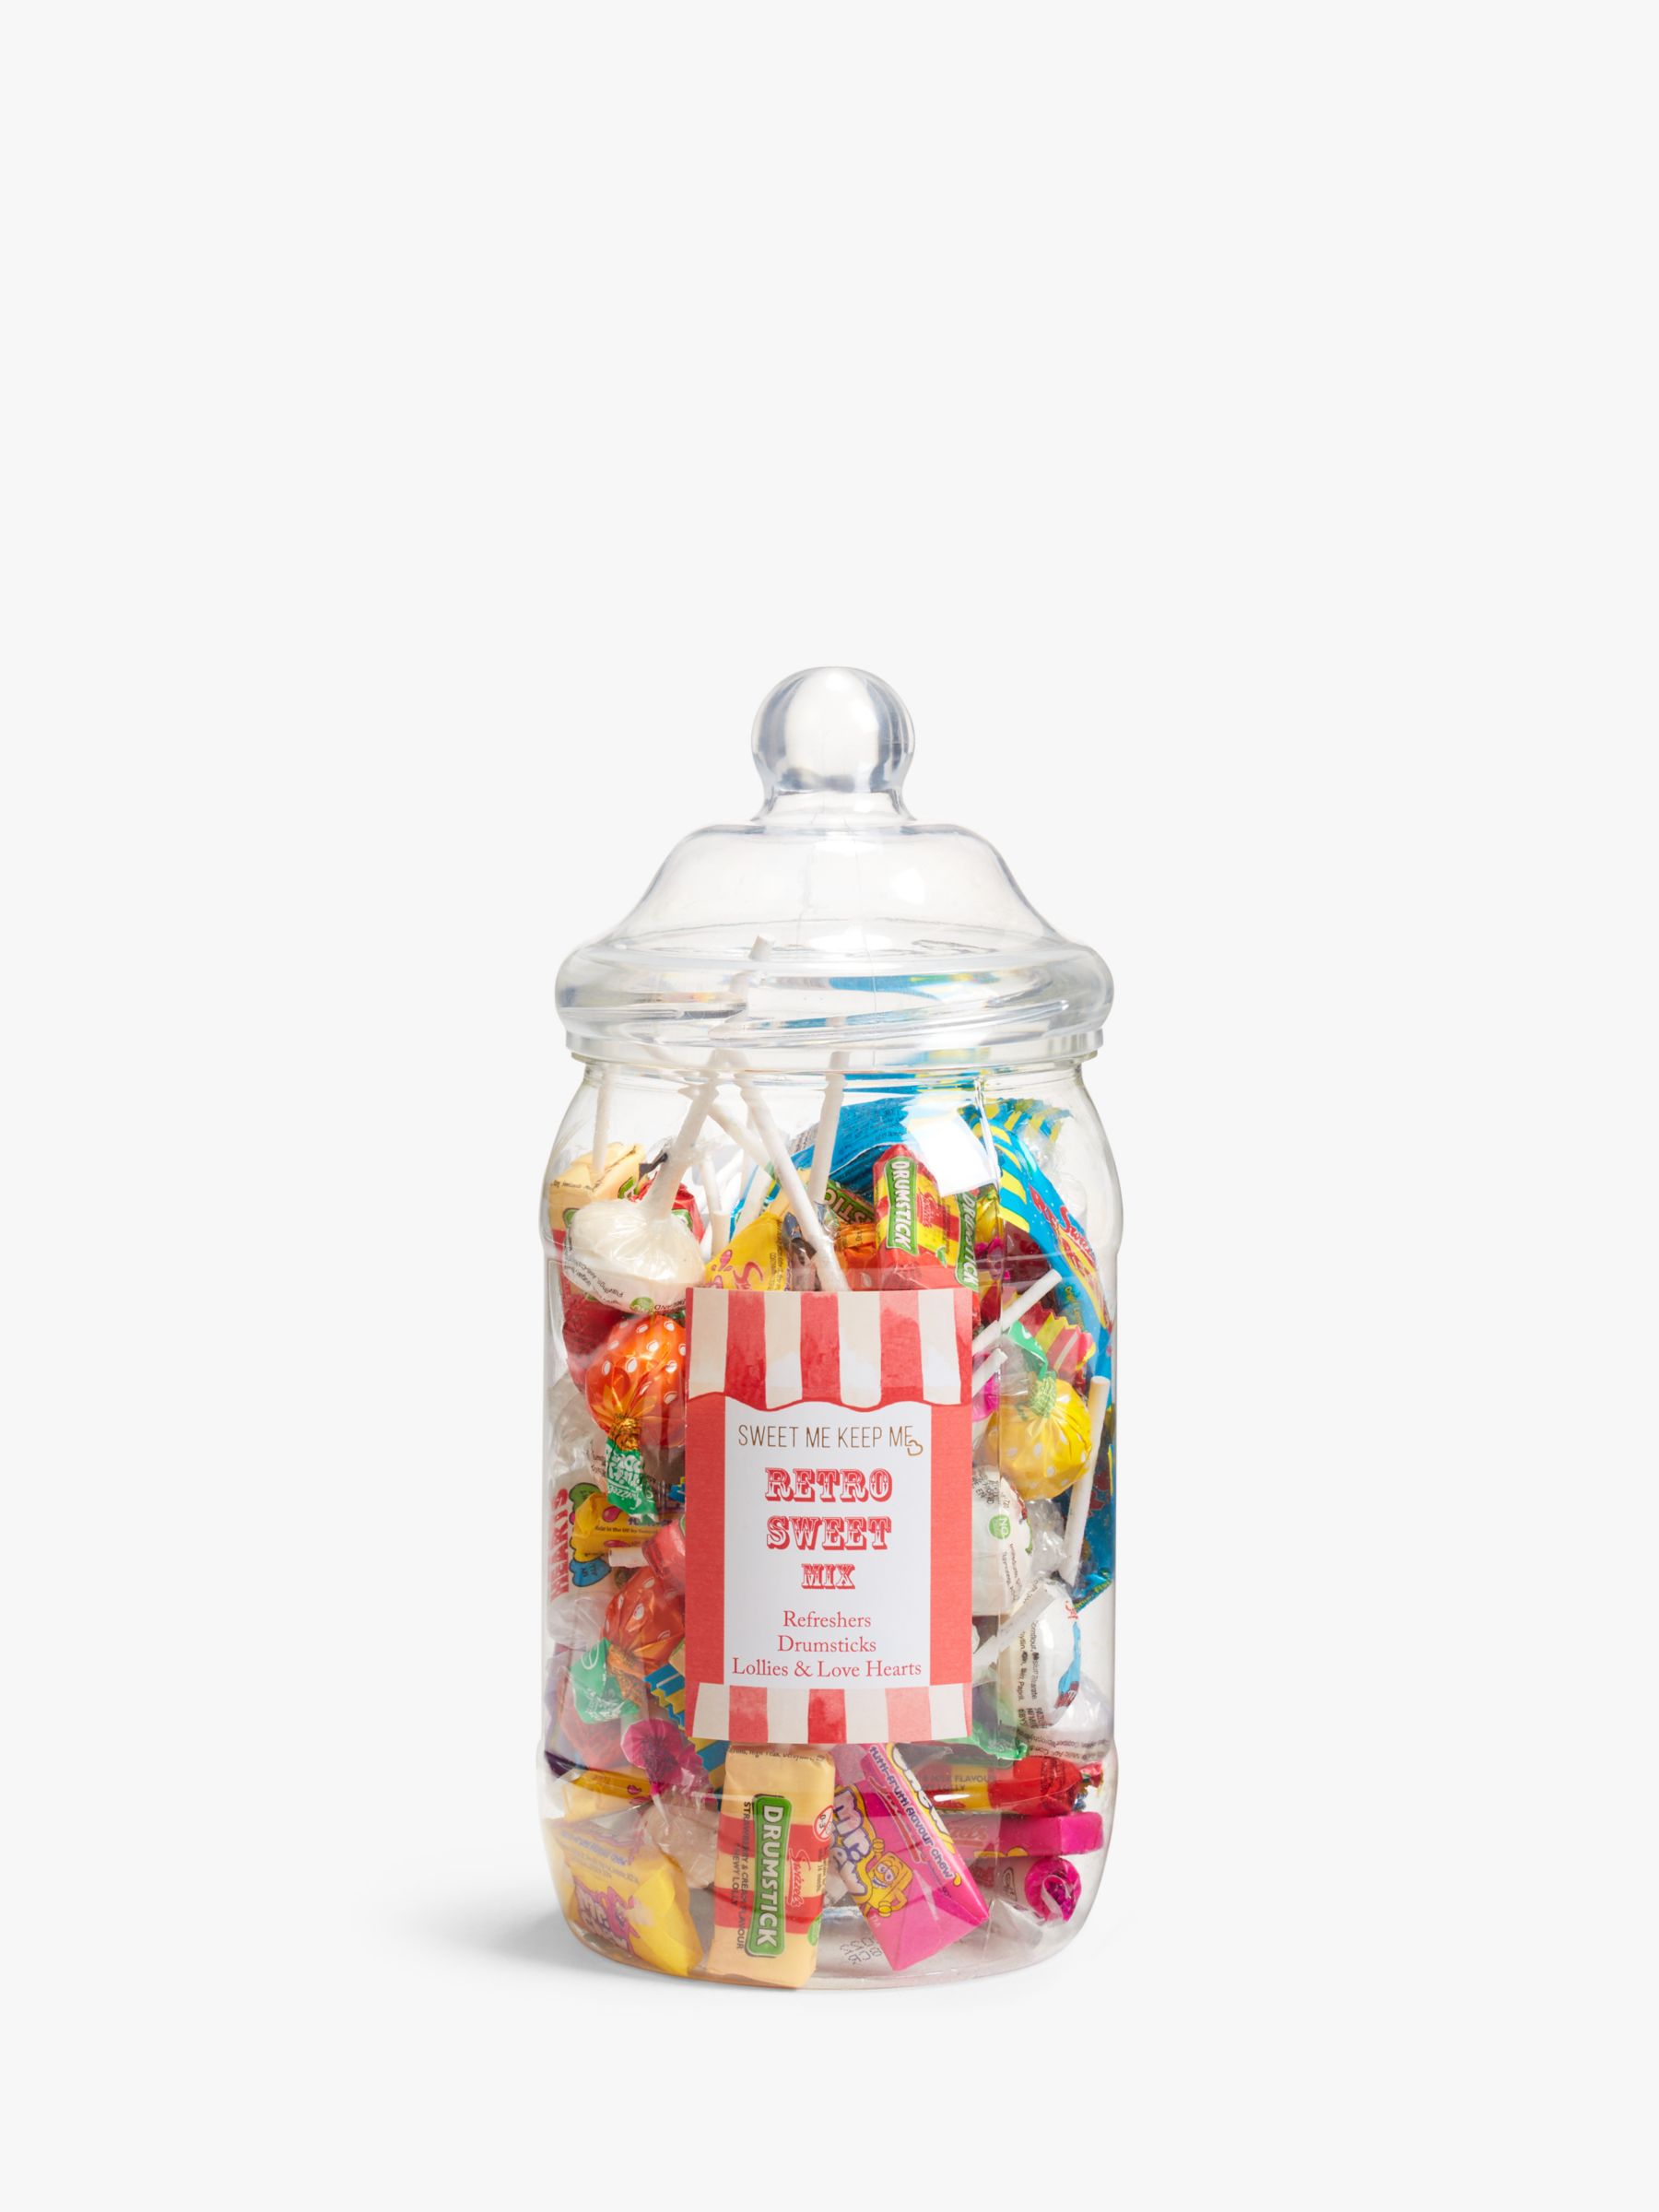 Fizzers - Retro Sweets & Old Fashioned Sweets at The Sweetie Jar